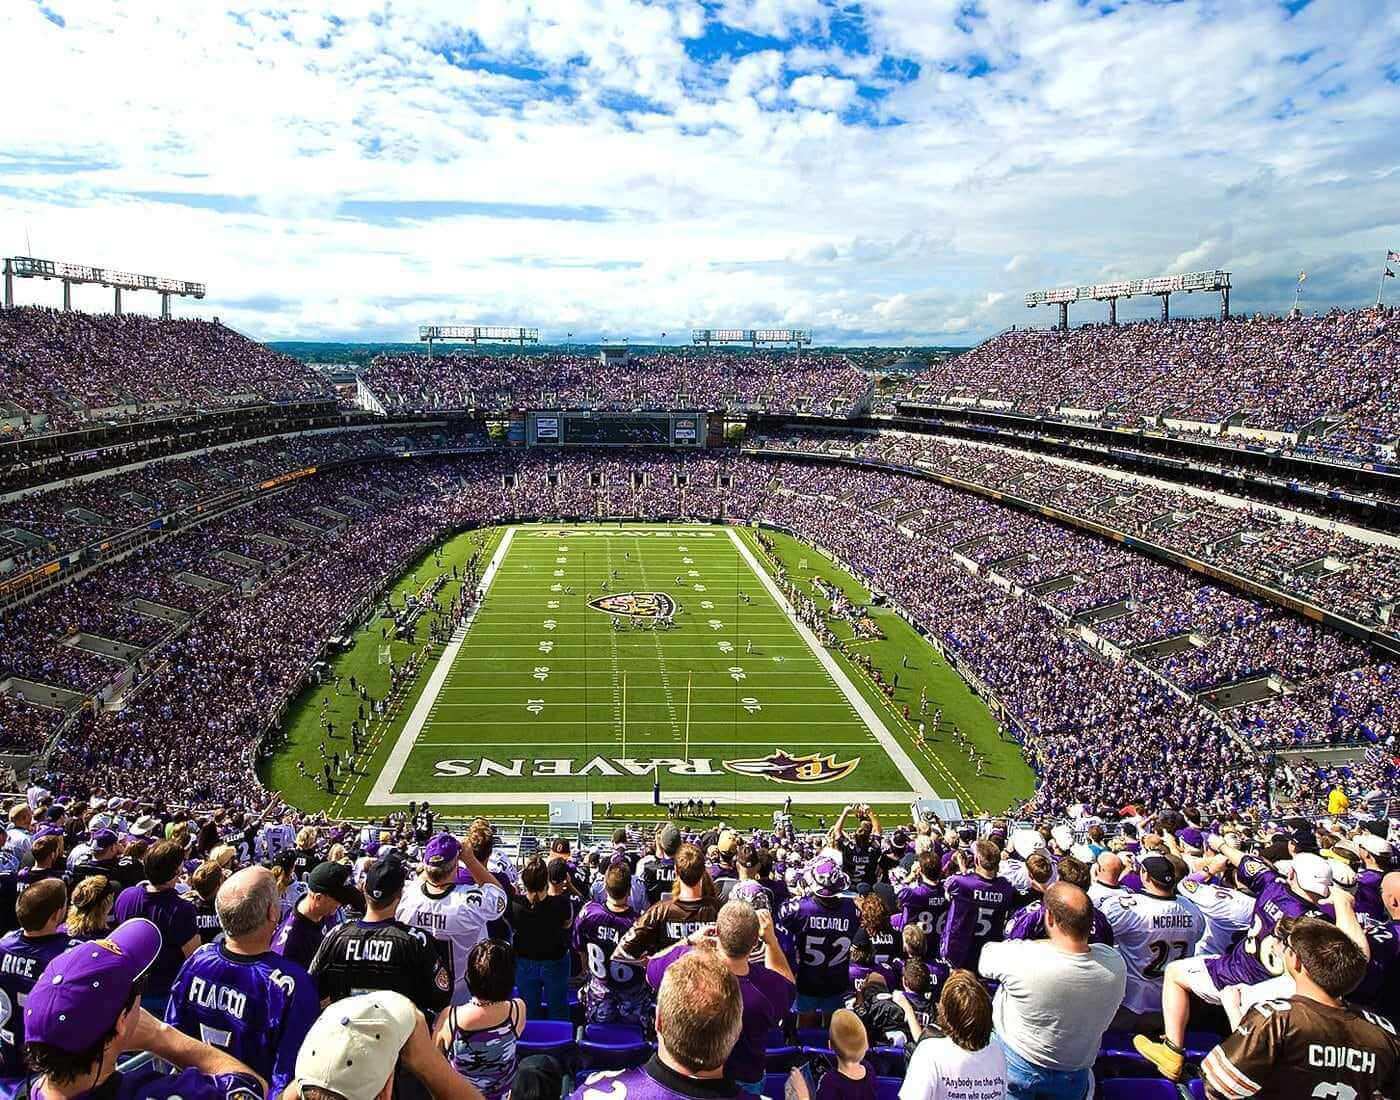 M&T Bank Stadium History, Capacity, Events & Significance